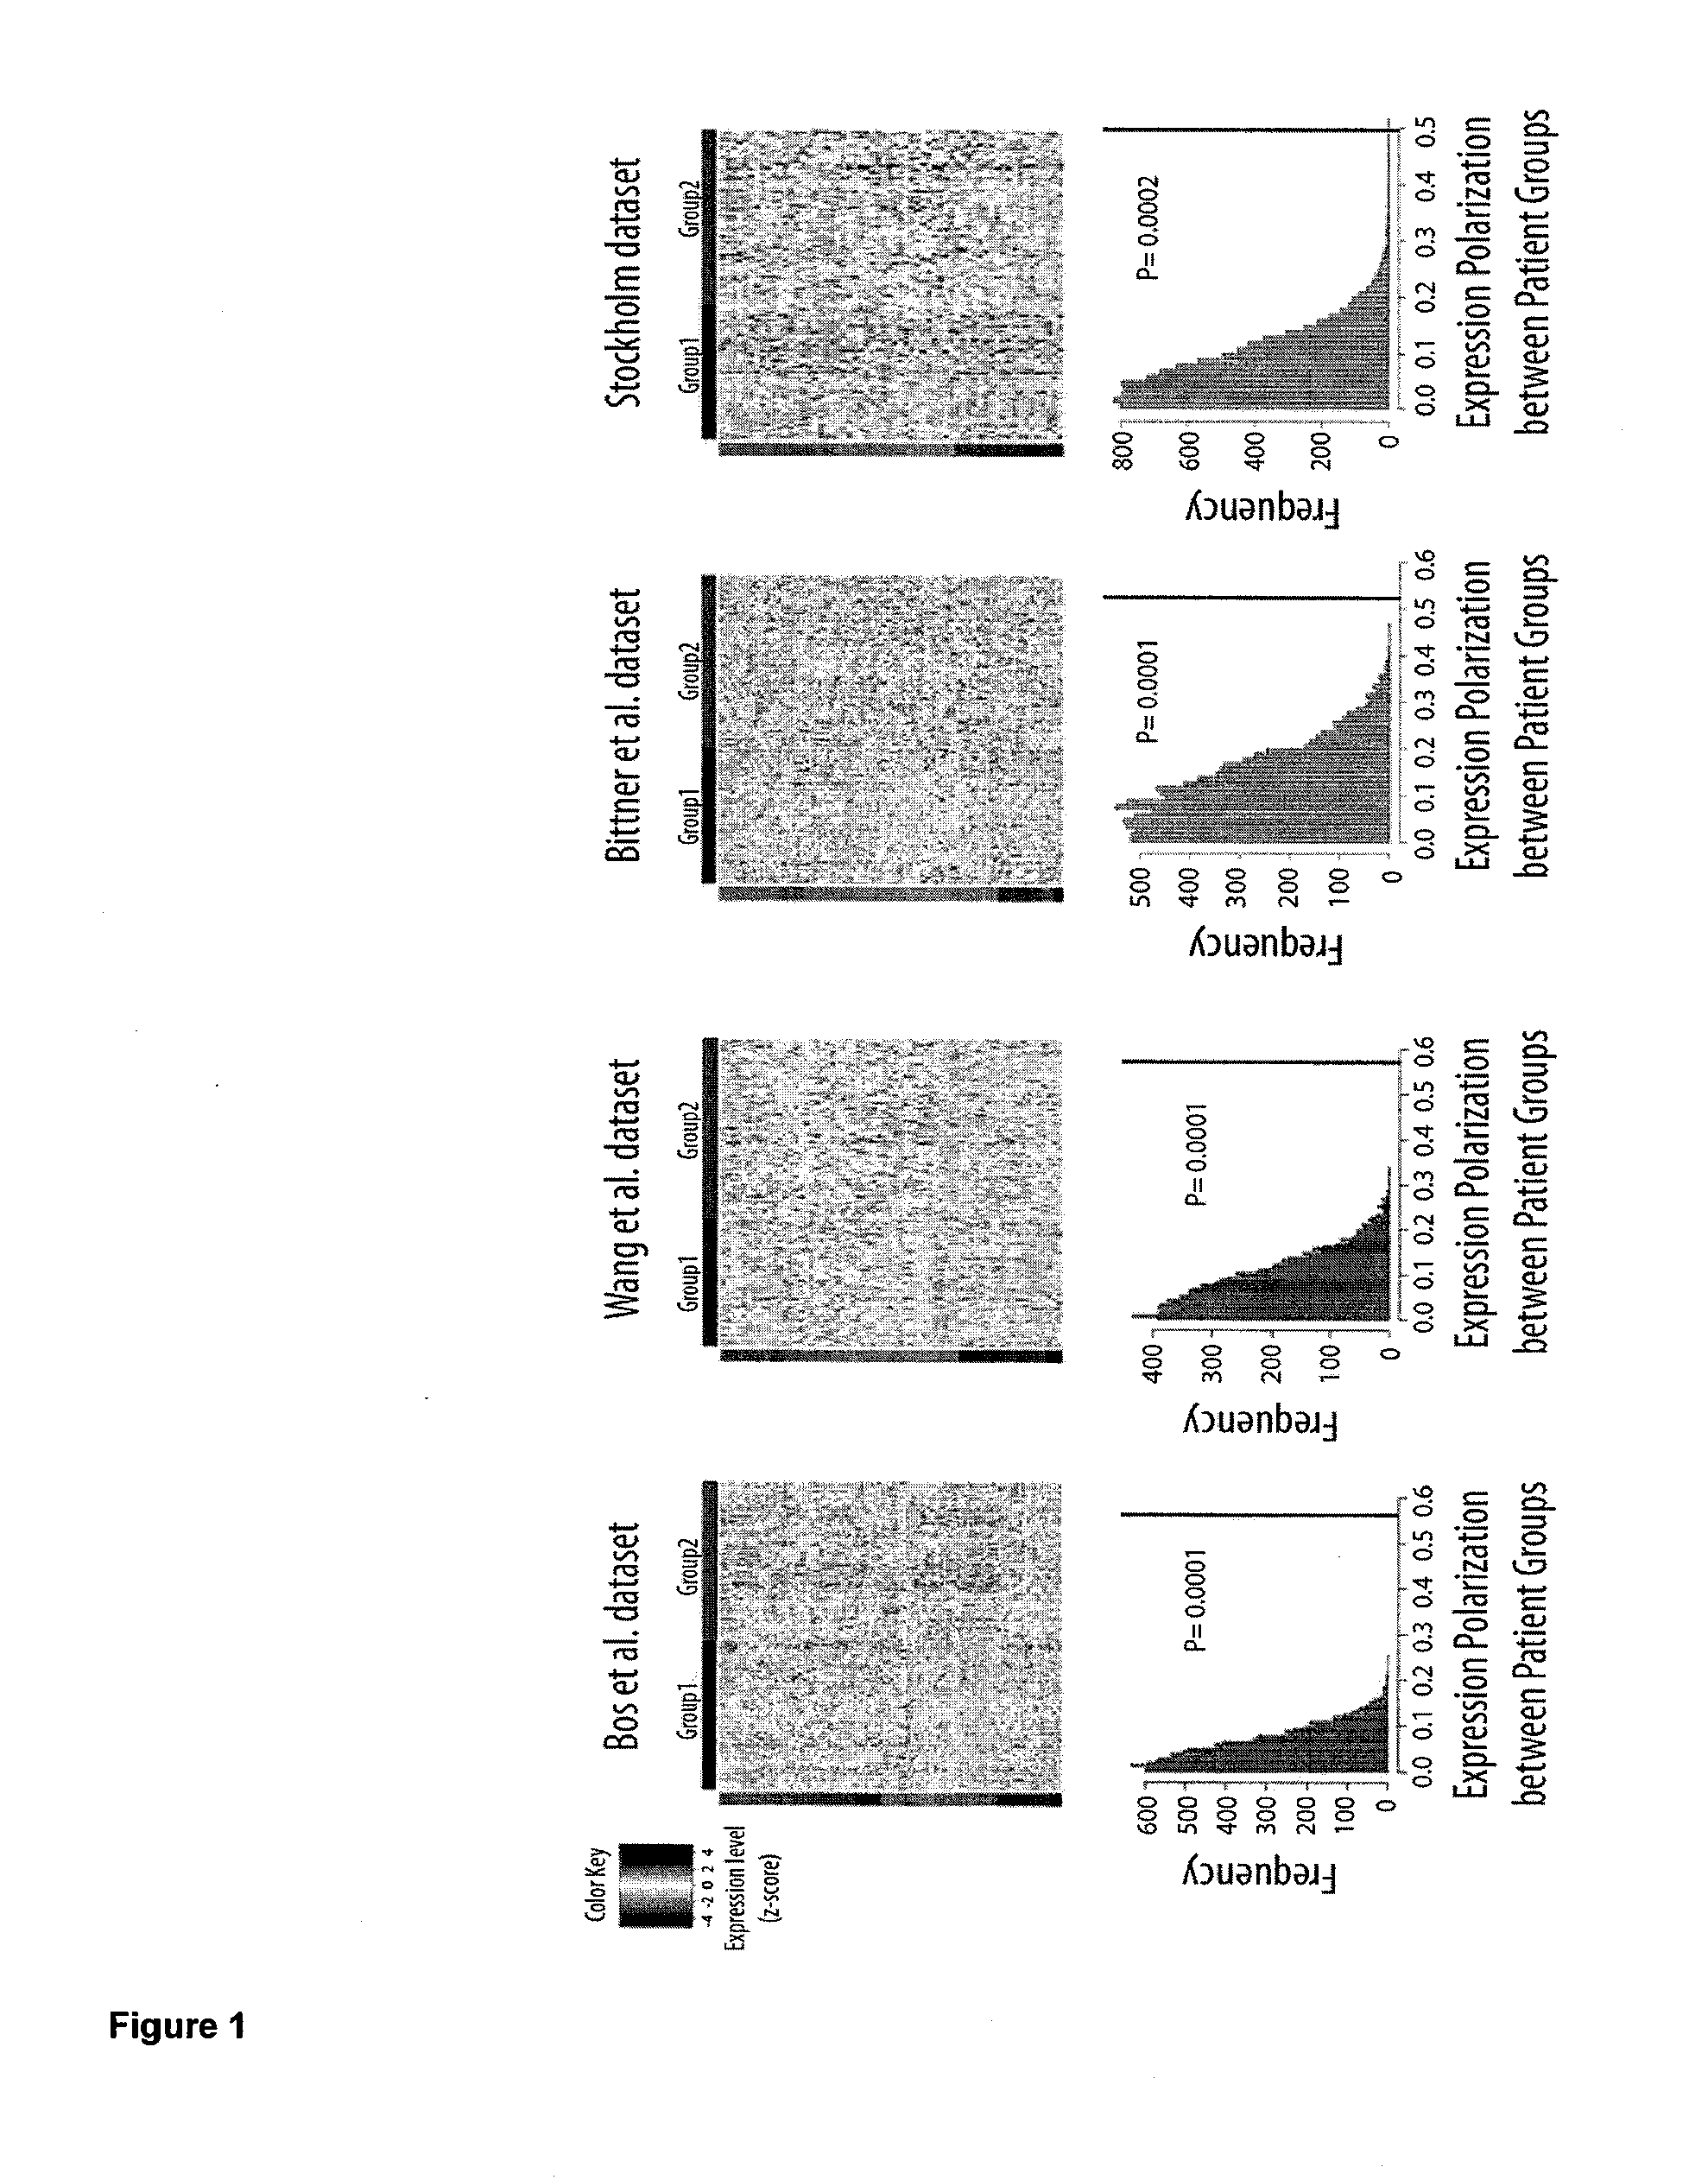 Protein tyrosine phosphatase, non-receptor type 11 (ptpn11) and triple-negative breast cancer